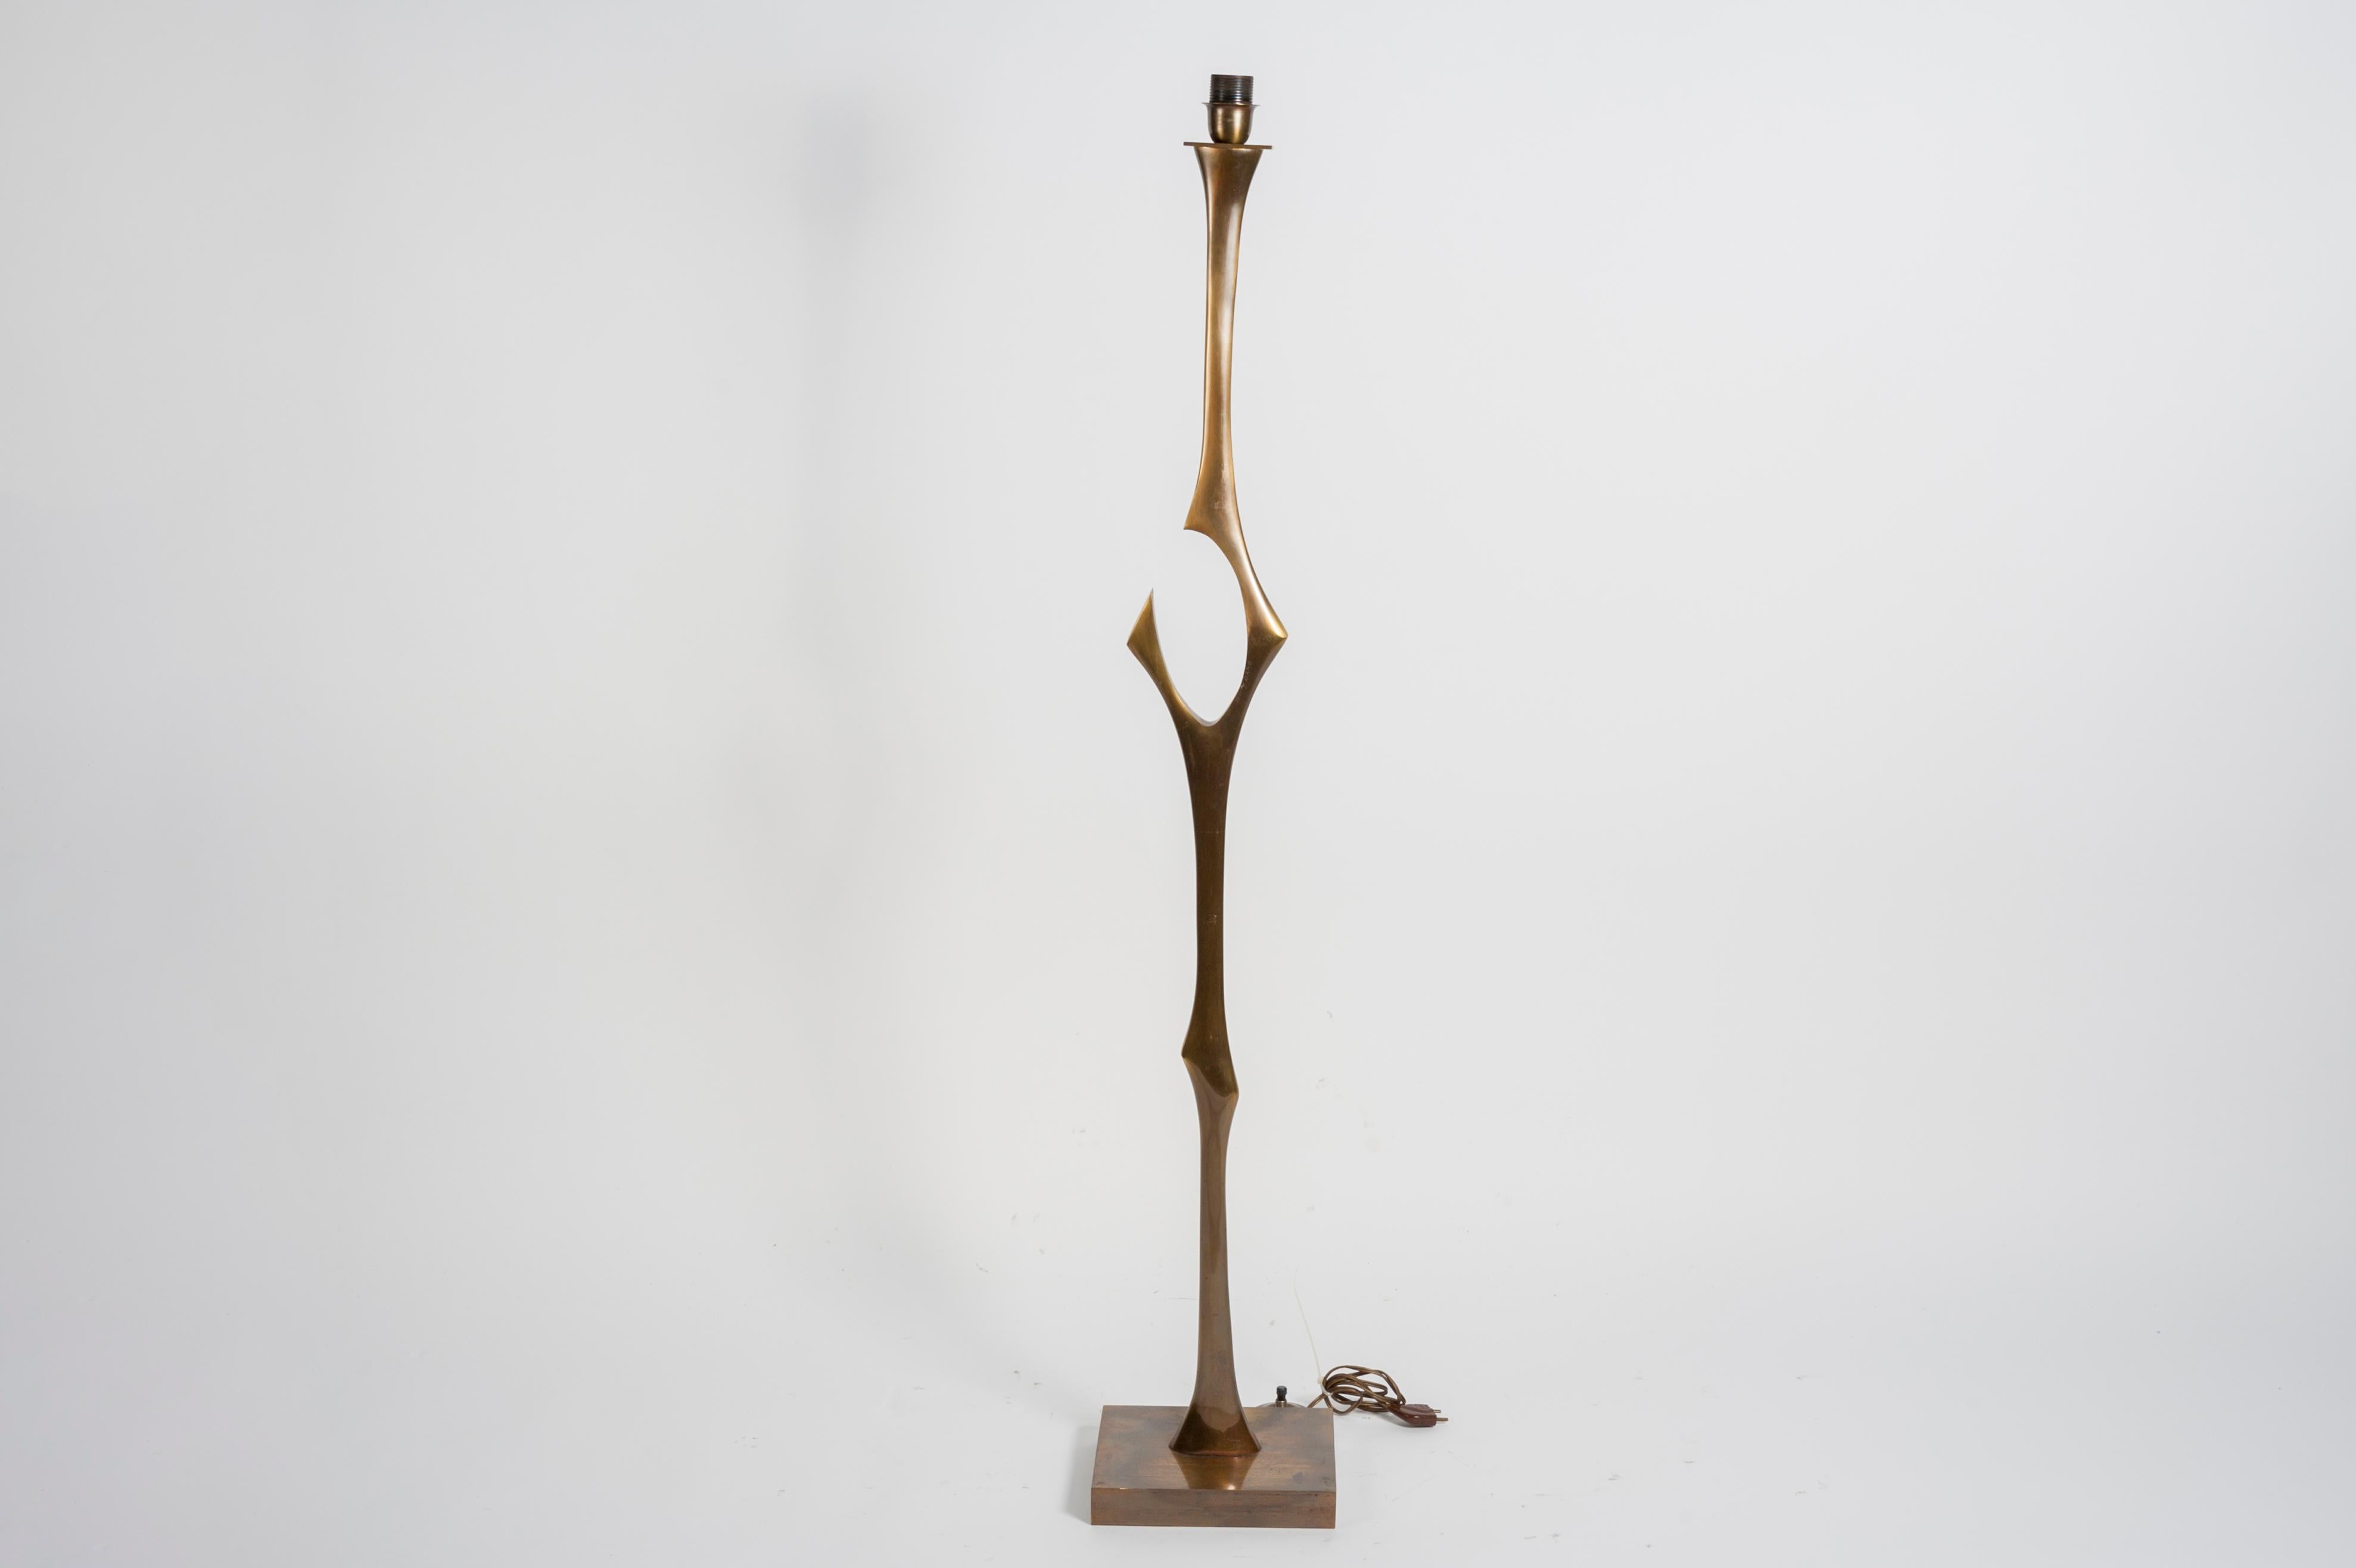 Sculptural bronze floor lamp
Signed
Good vintage condition (see photos of the base)
Dimensions given without shade
No shade included
Dimensions of this shade 25 x 44 x 30 cm.